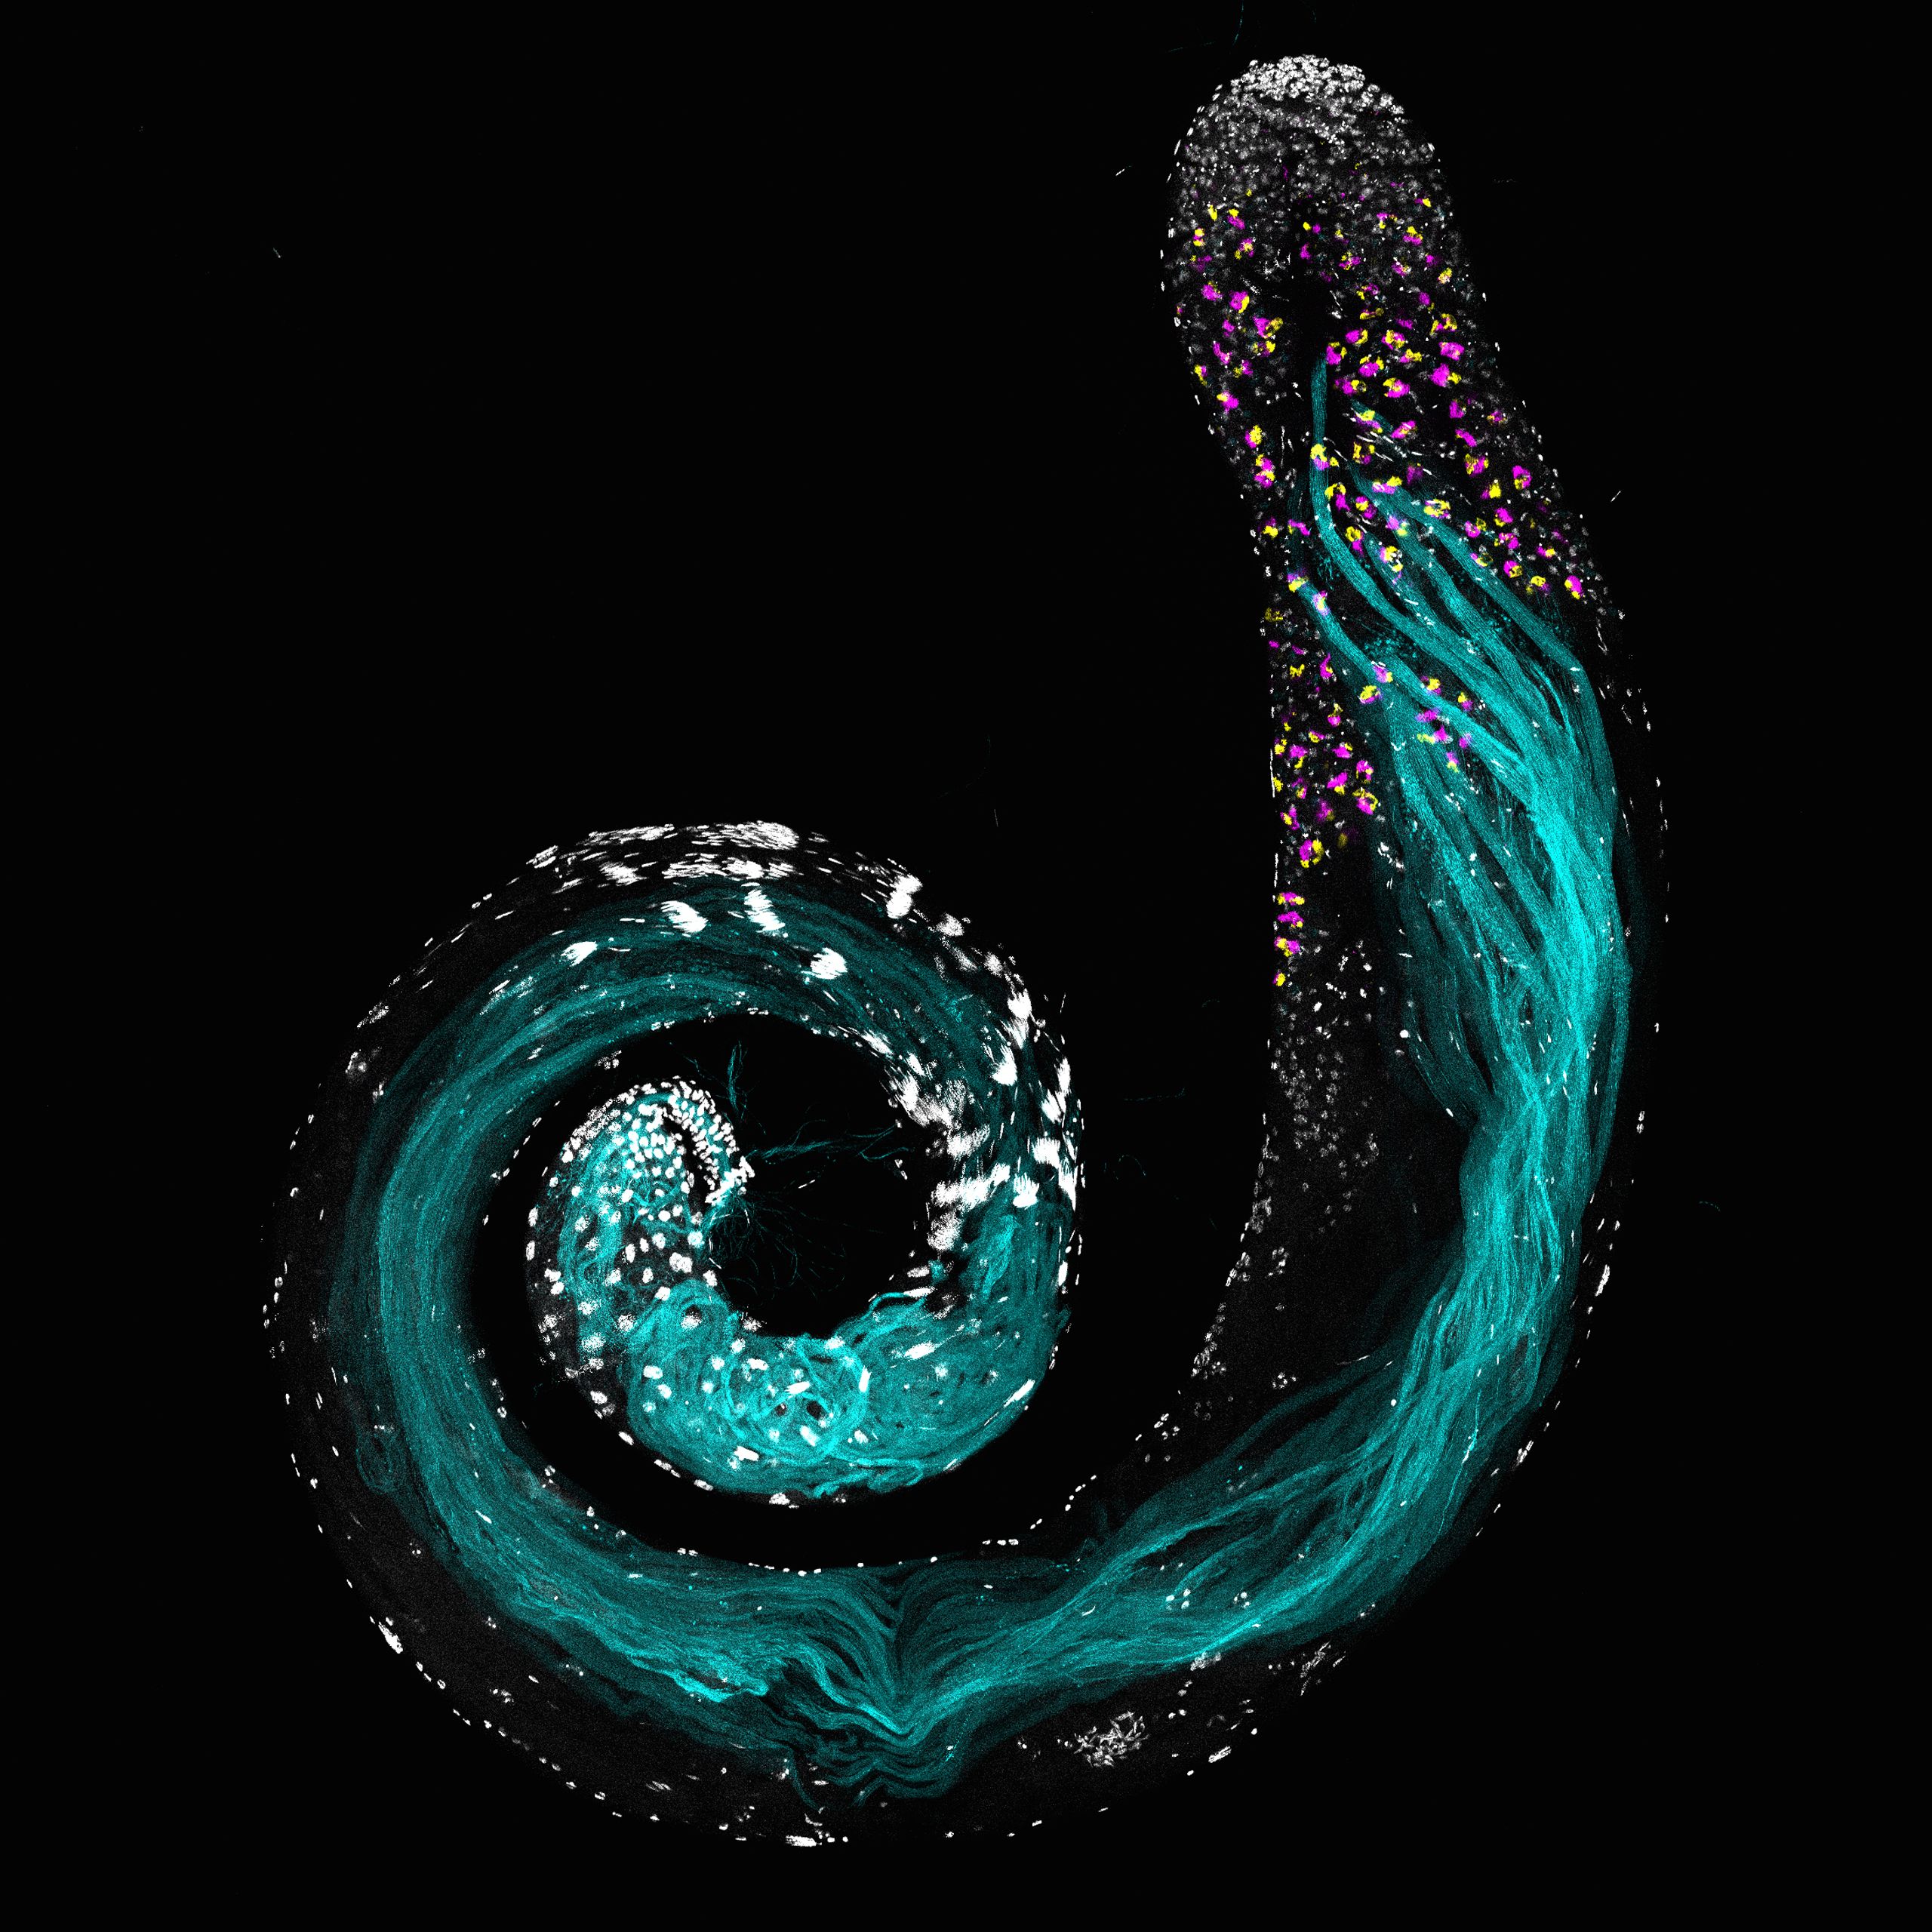 A microscopic image showing the coiled spiral of fruit fry testes and visible inside are cyan coloured sperm